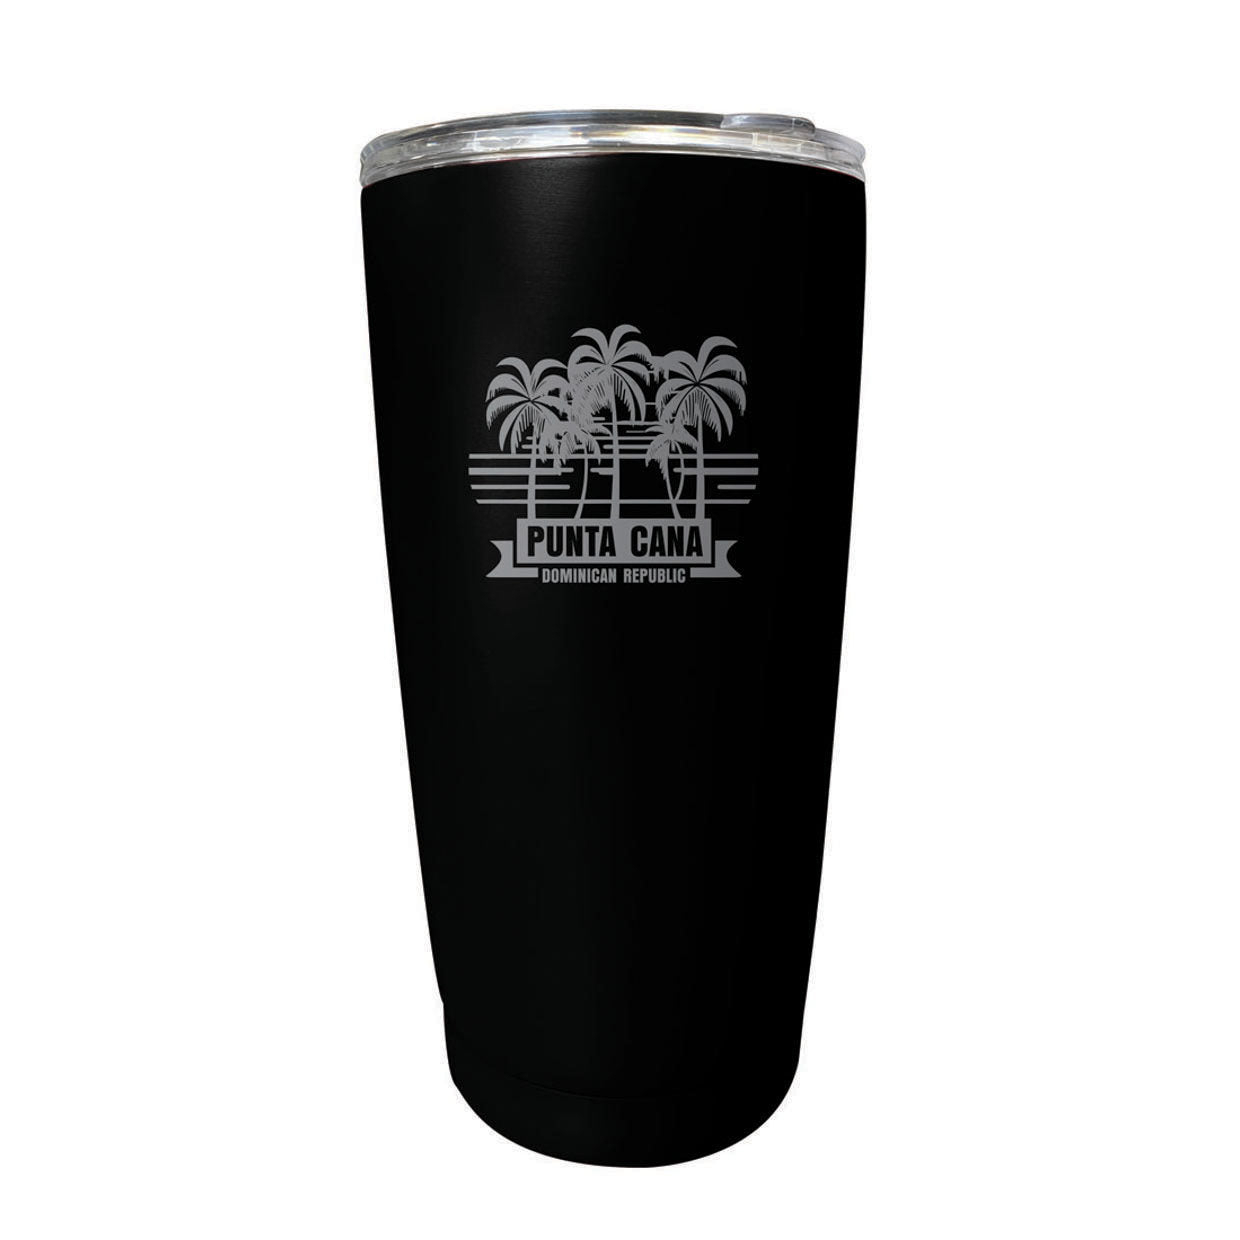 Punta Cana Dominican Republic Souvenir 16 Oz Stainless Steel Insulated Tumbler Etched - Black, PALM BEACH